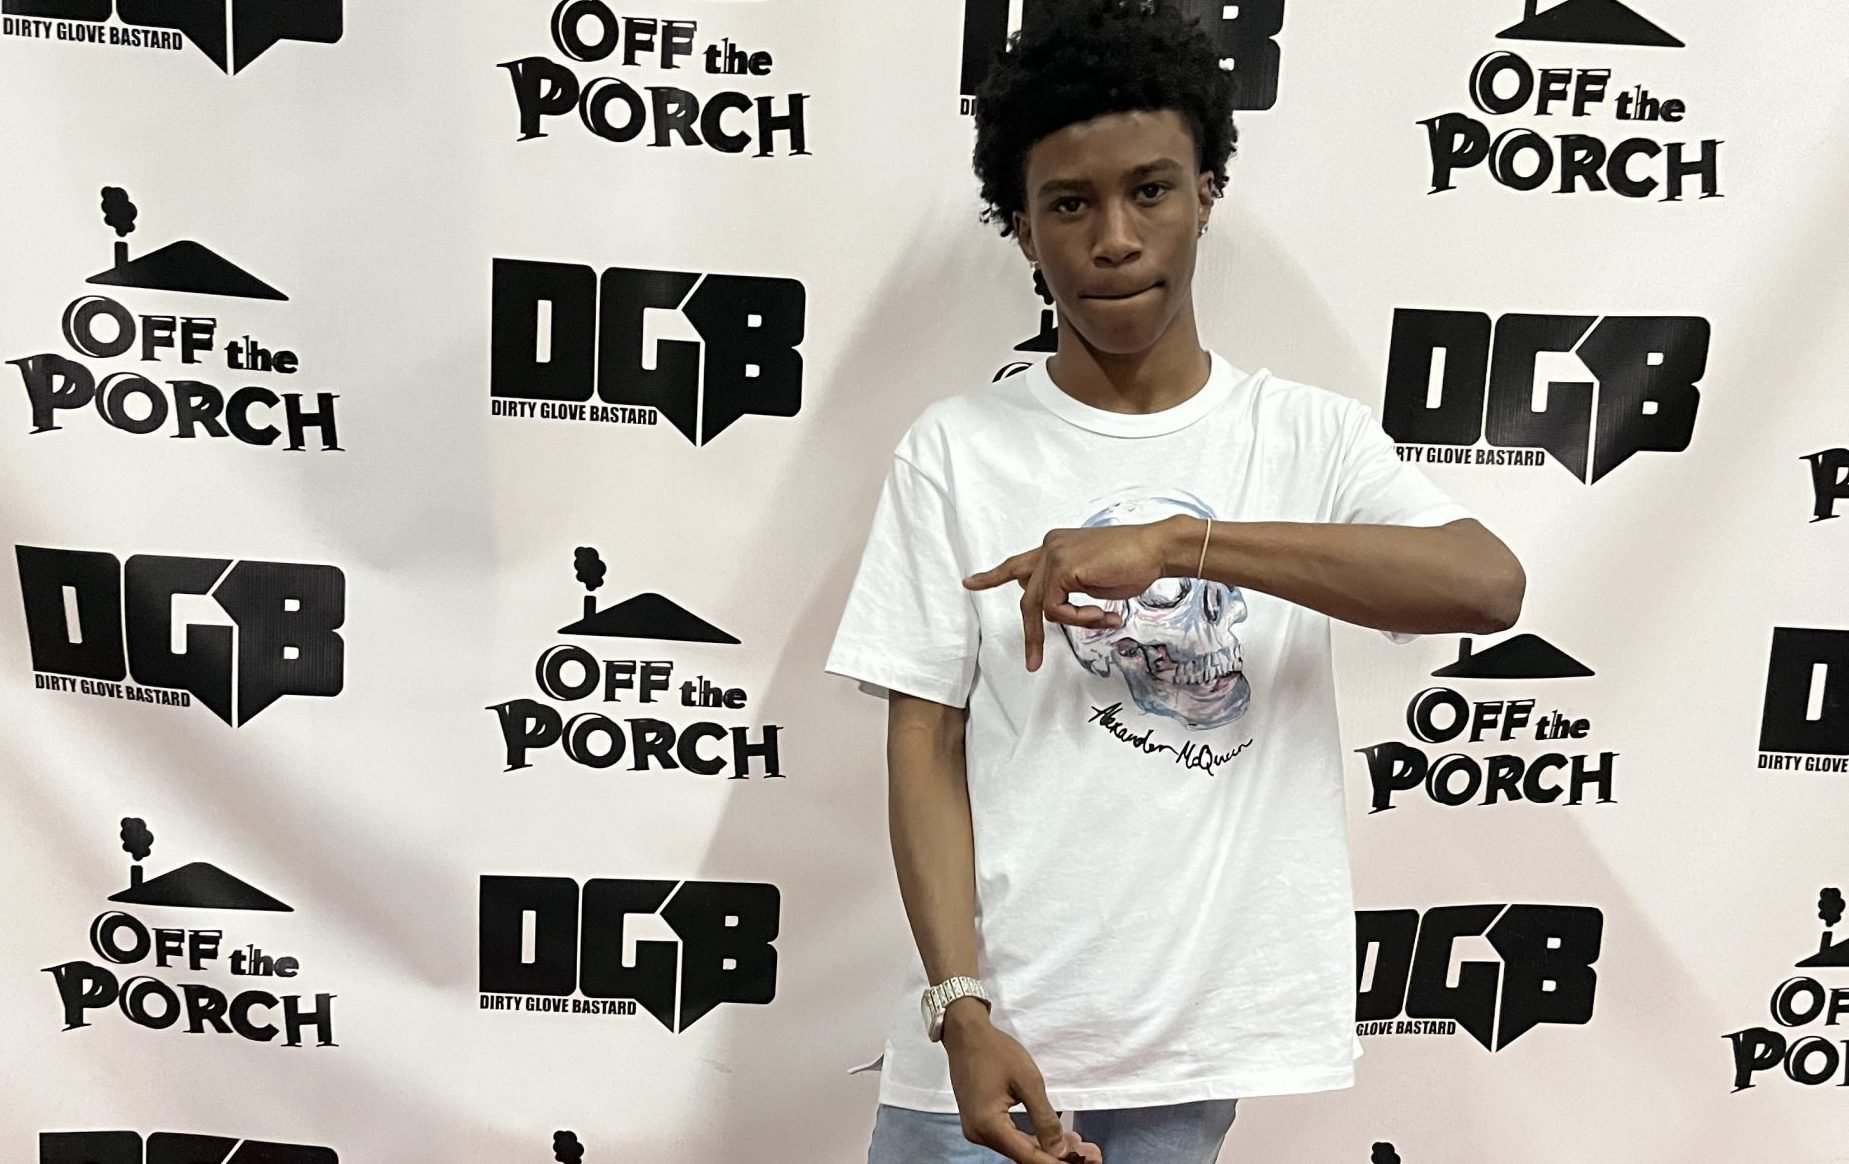 Meet Lil G, One of Chicago’s Fast Rising Hip-Hop artist